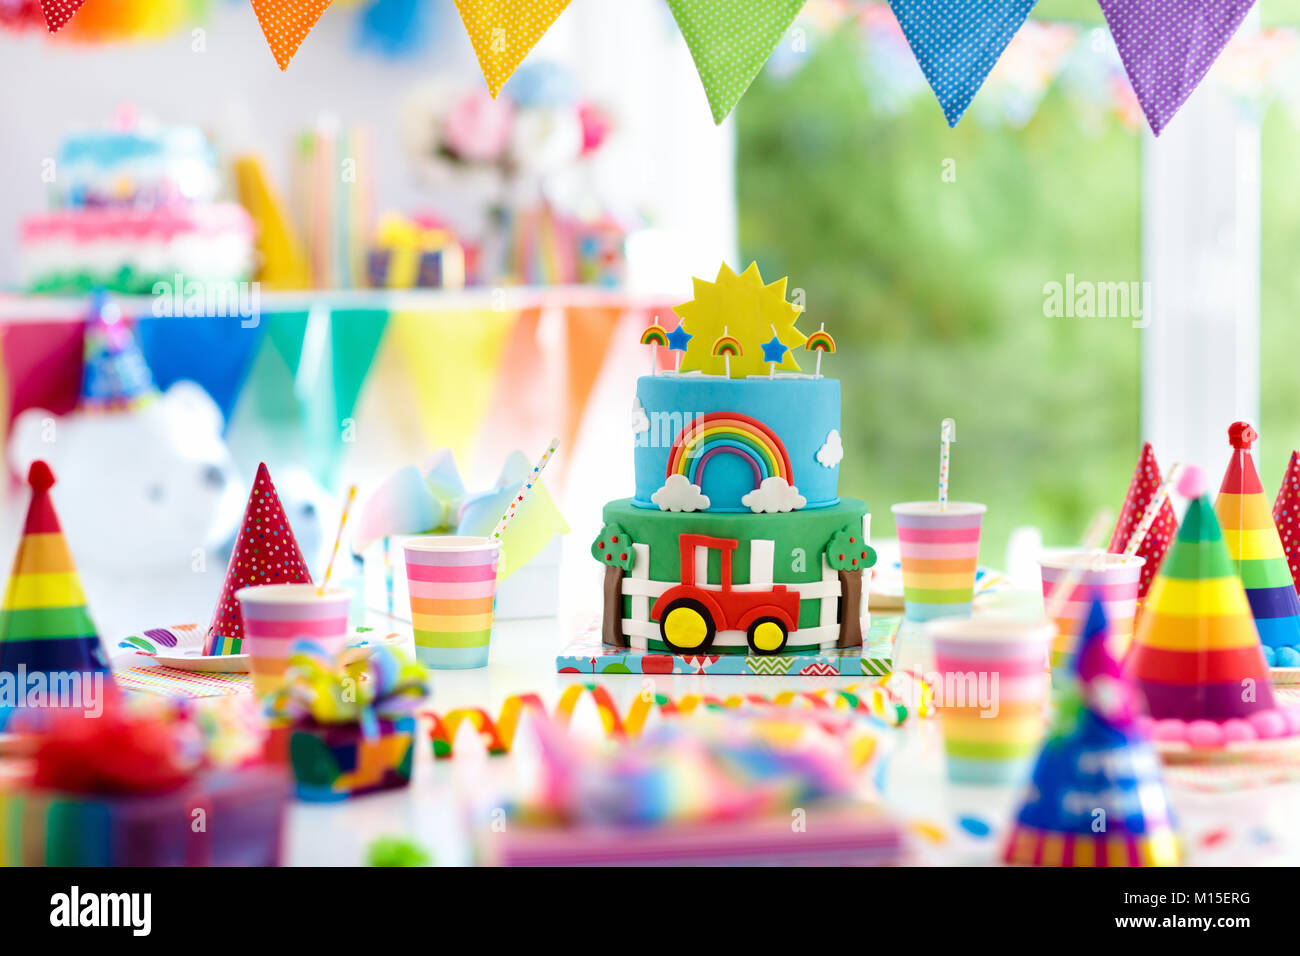 Kids birthday party decoration. Colorful cake with candles. Farm and transportation theme boys party. Decorated table for child birthday celebration.  Stock Photo